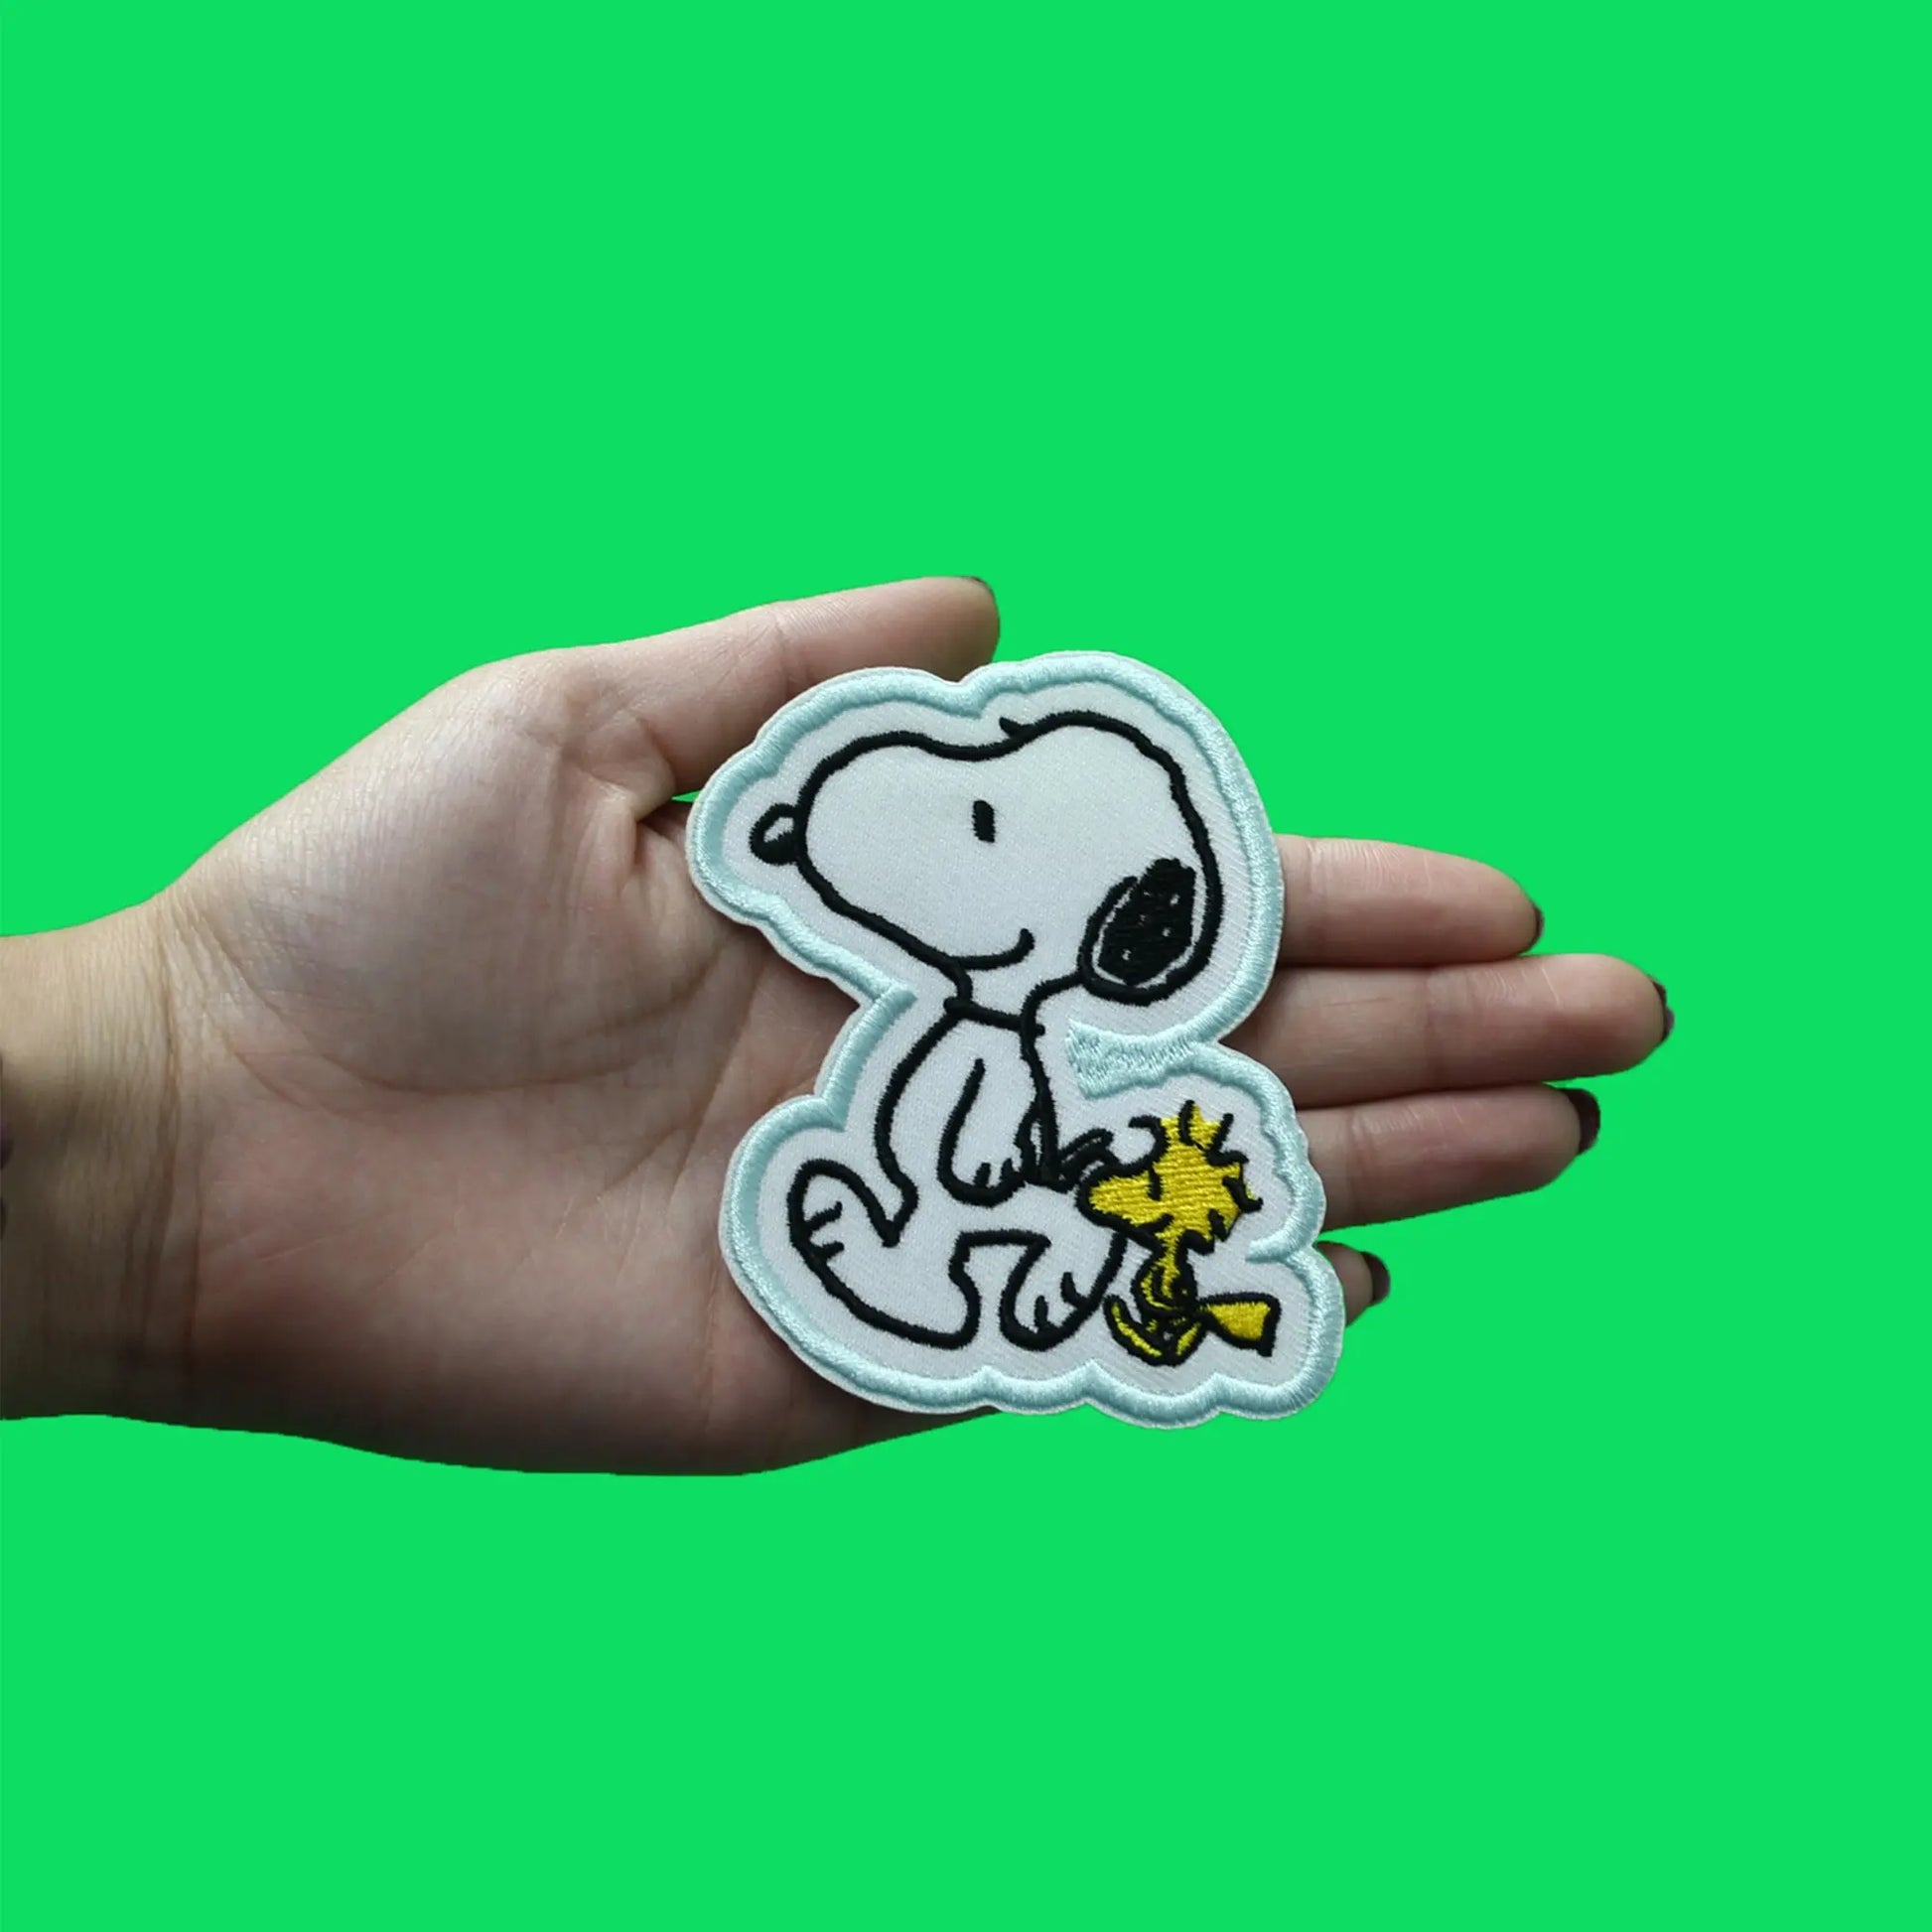 Snoopy Embroidery Clothing Patch, Patches Clothes Peanuts